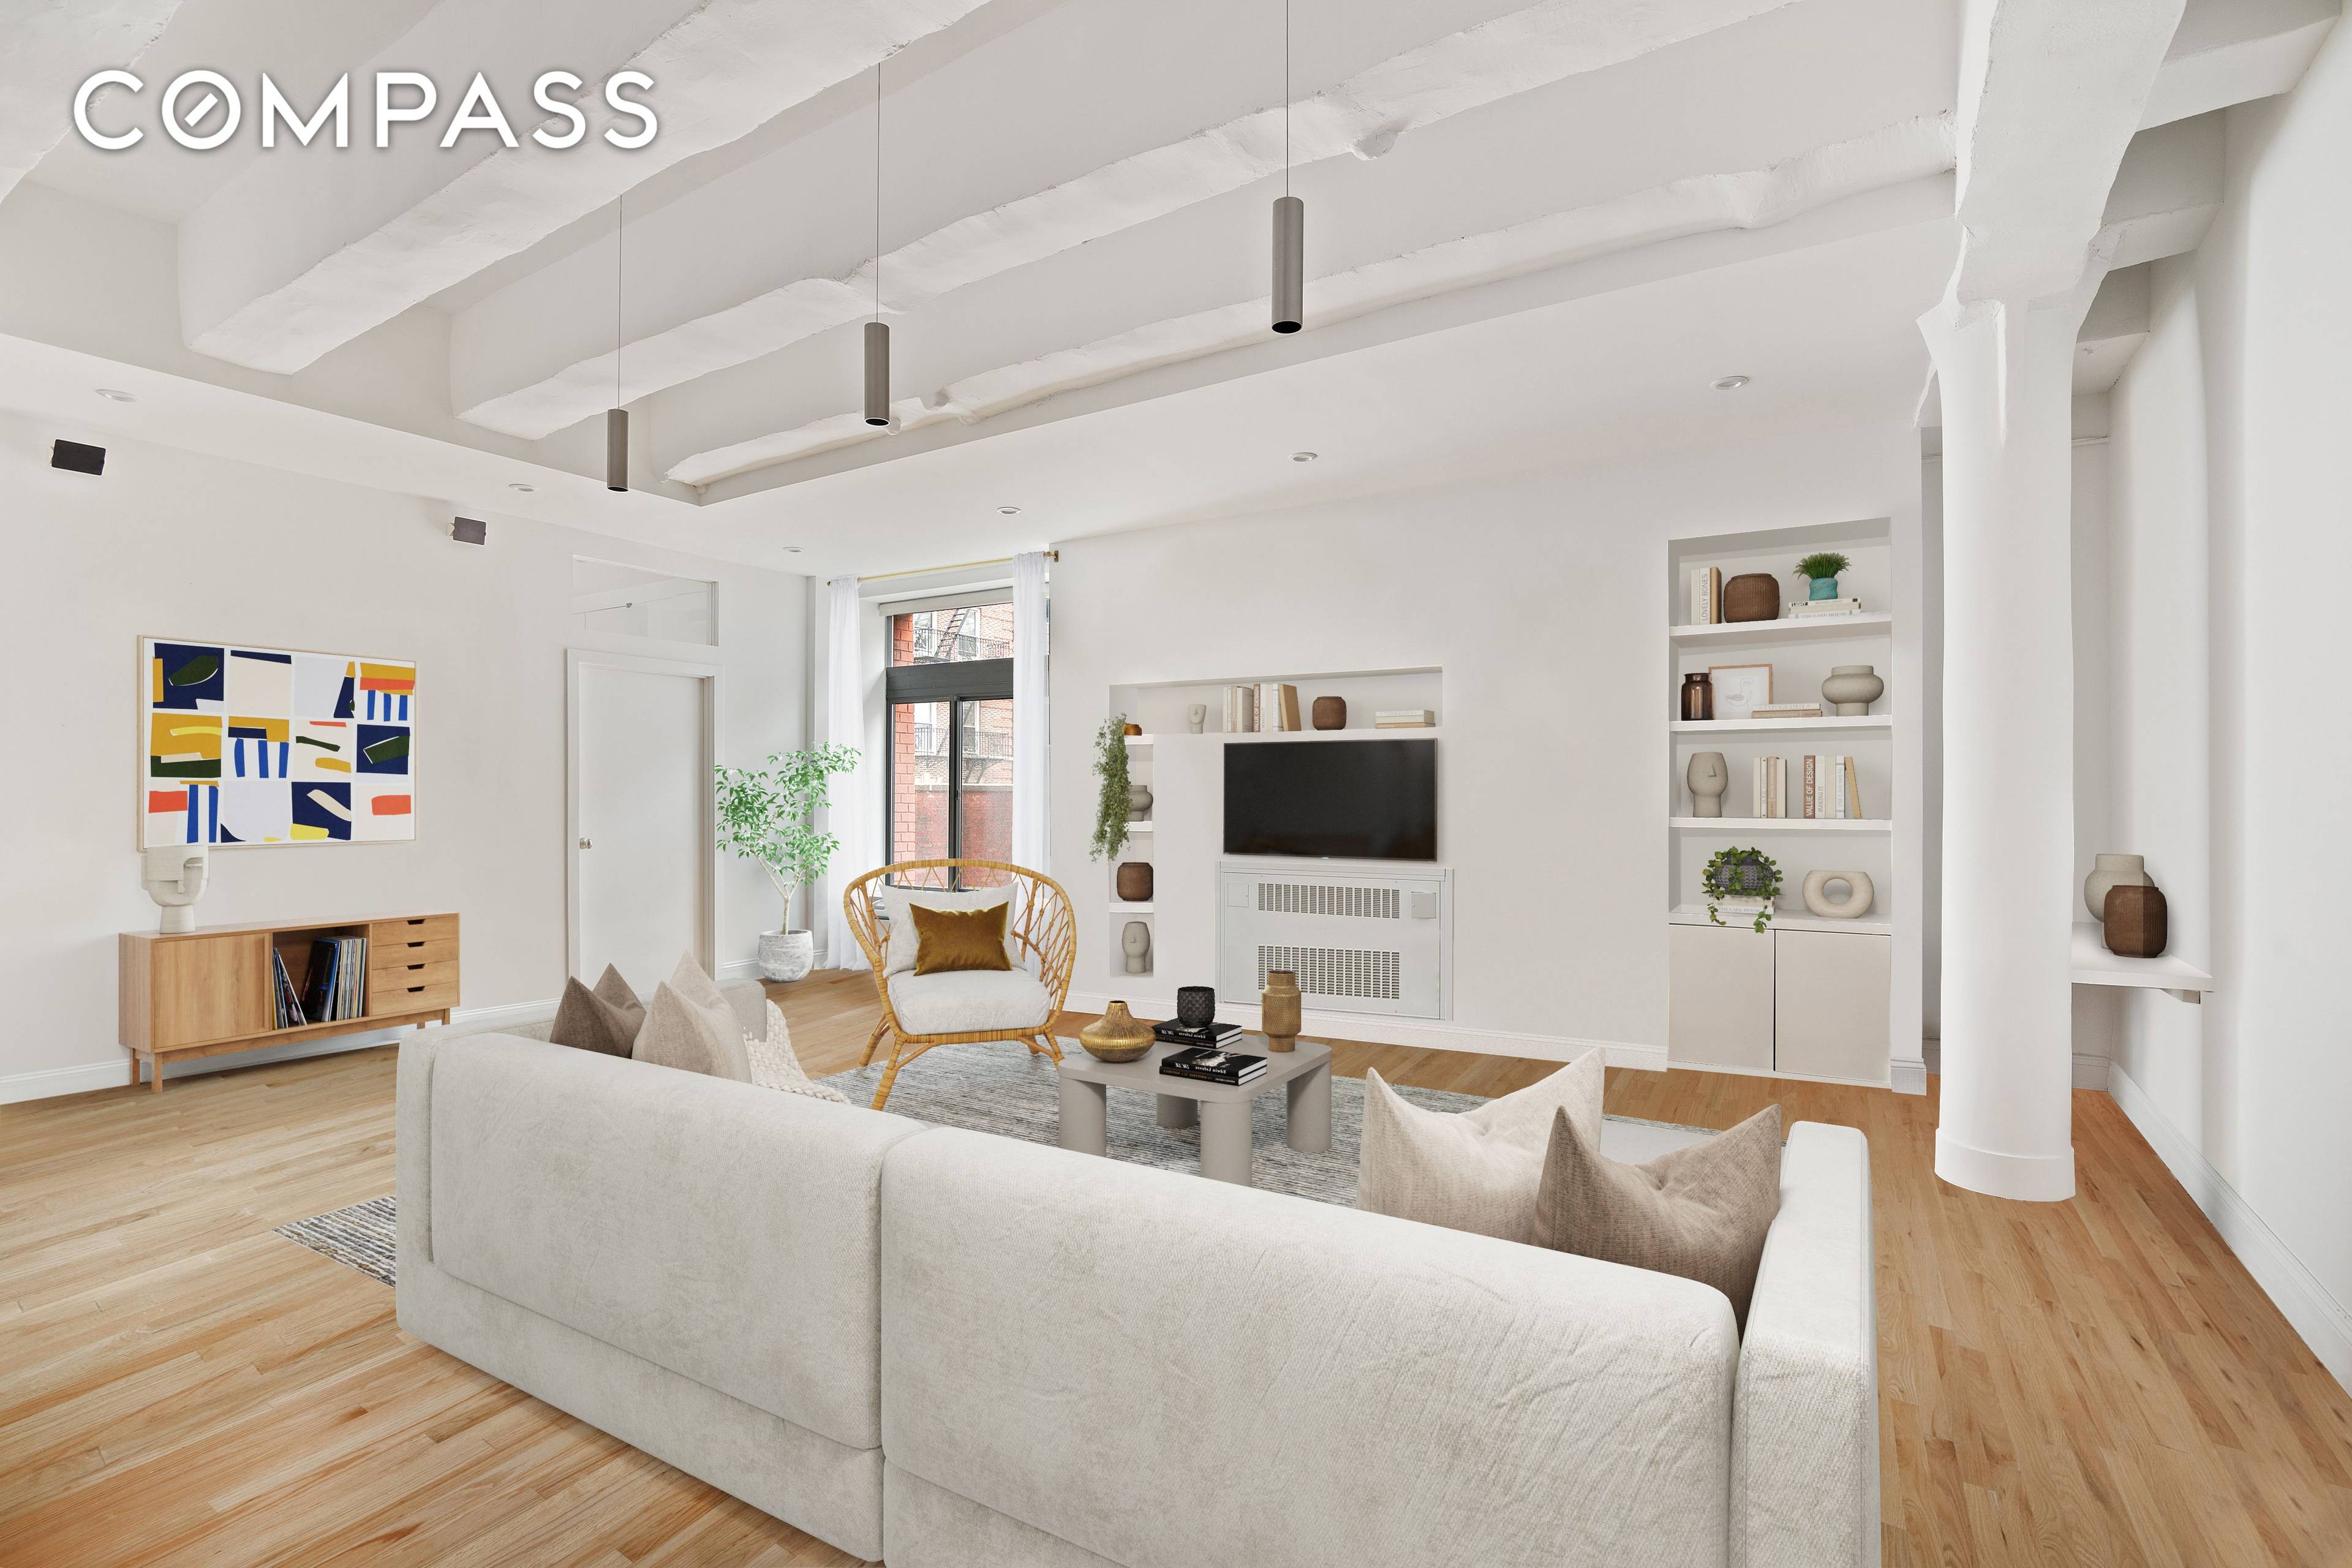 Welcome to apartment 3F, a sprawling 3 bedroom, 2 bathroom corner loft in the heart of Nolita !